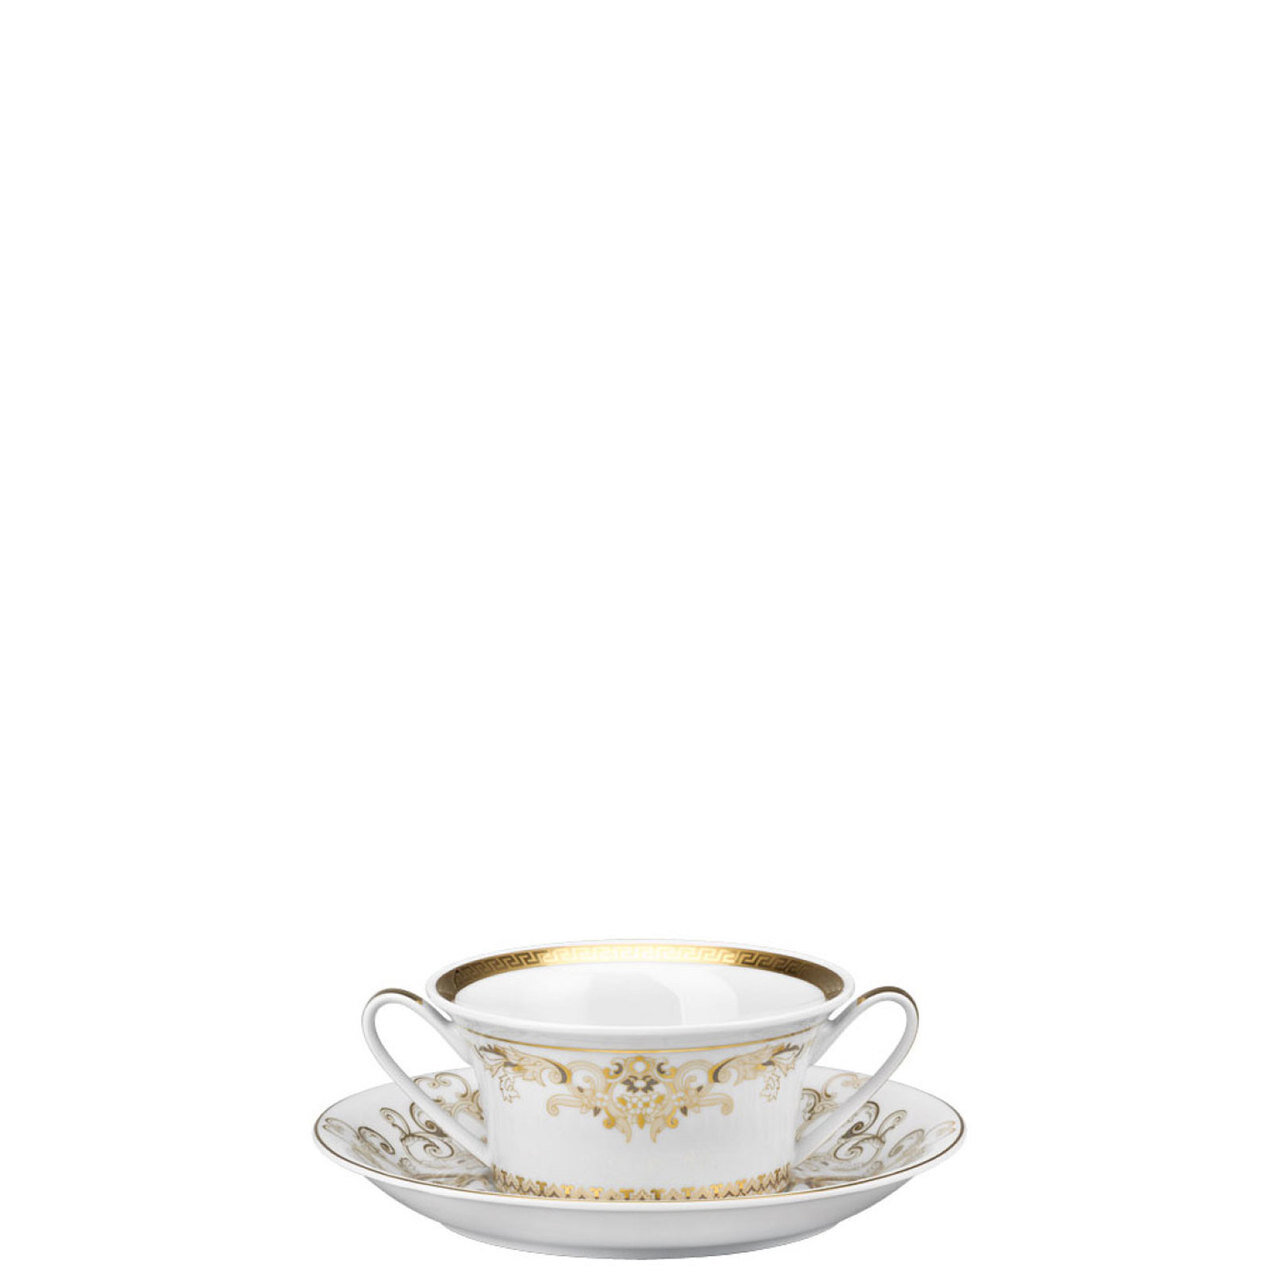 Versace Medusa Gala Gold Cream Soup Cup and Saucer 6 3/4 Inch 10 oz.